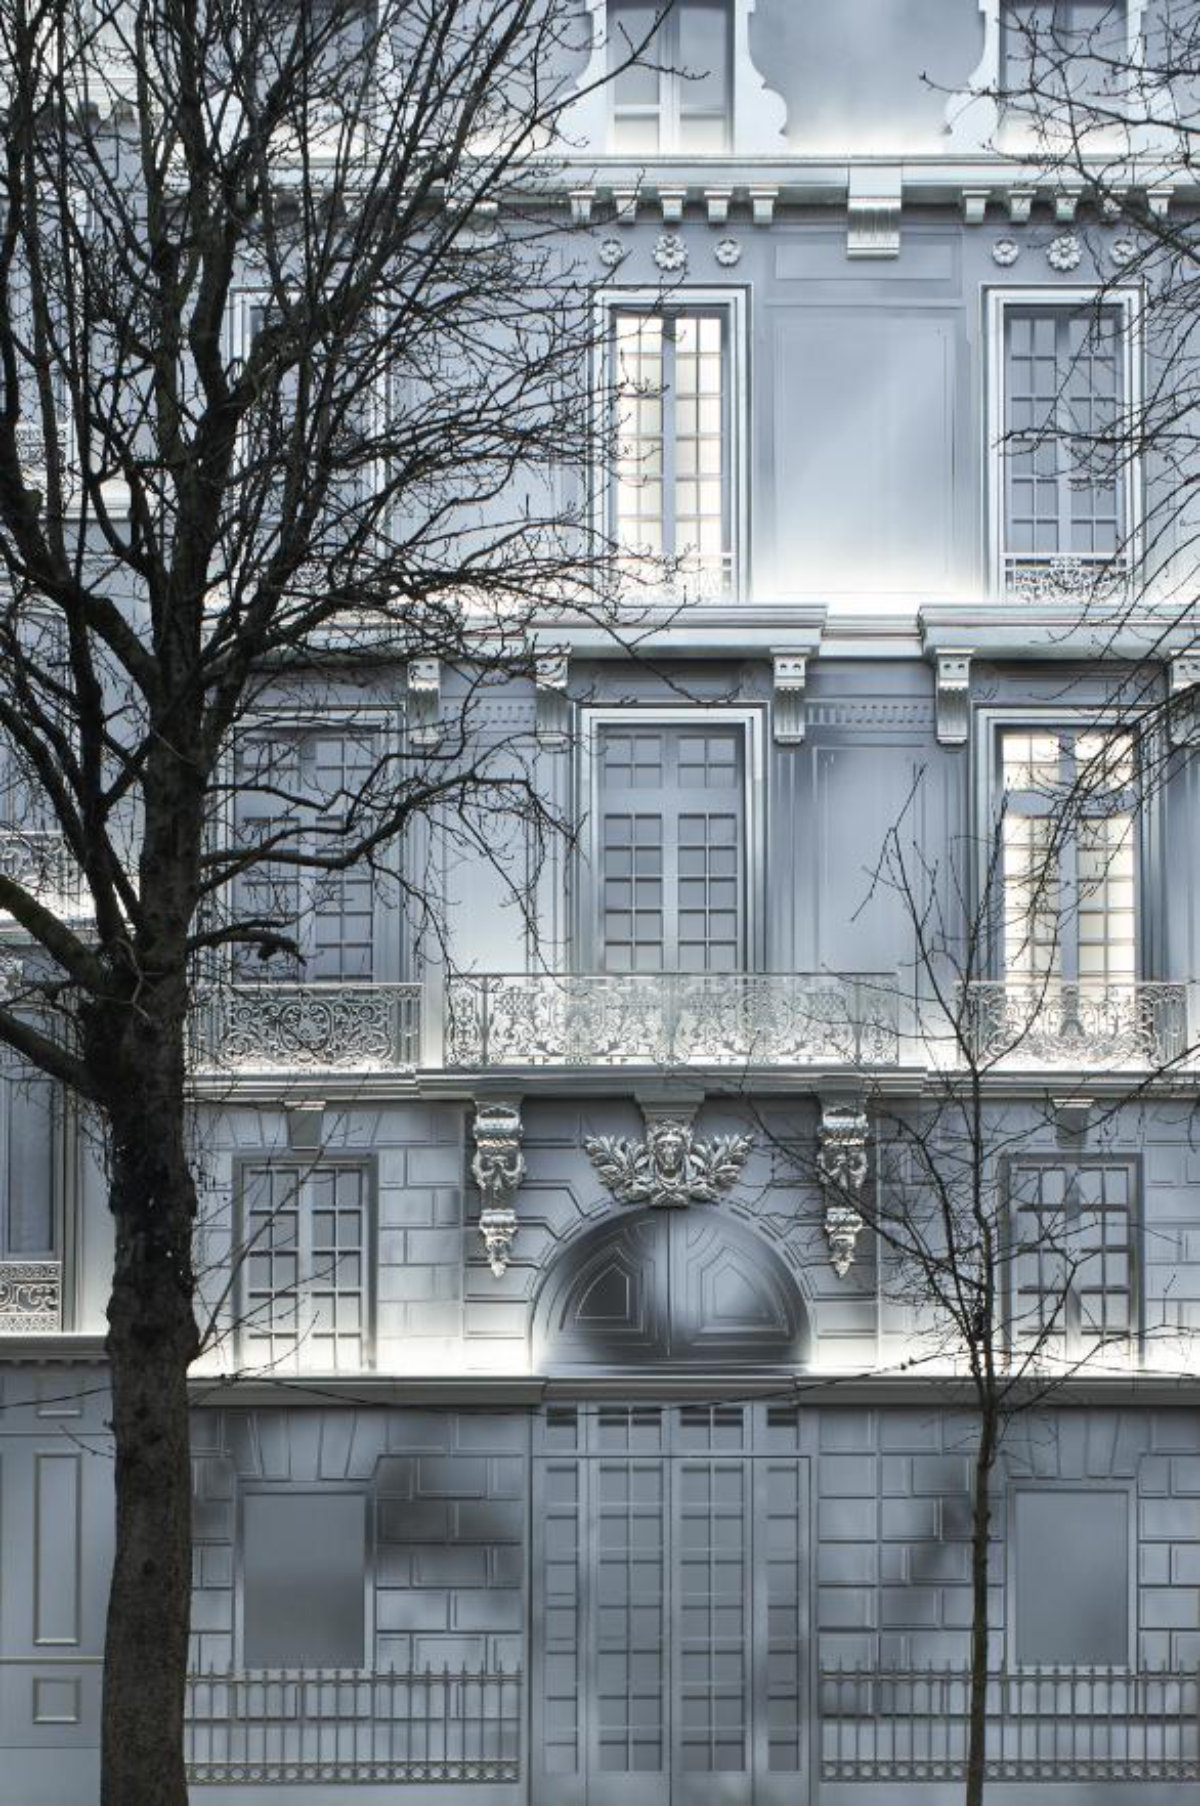 Dior mansion at 30 Avenue Montaigne dresses up with spectacular installations